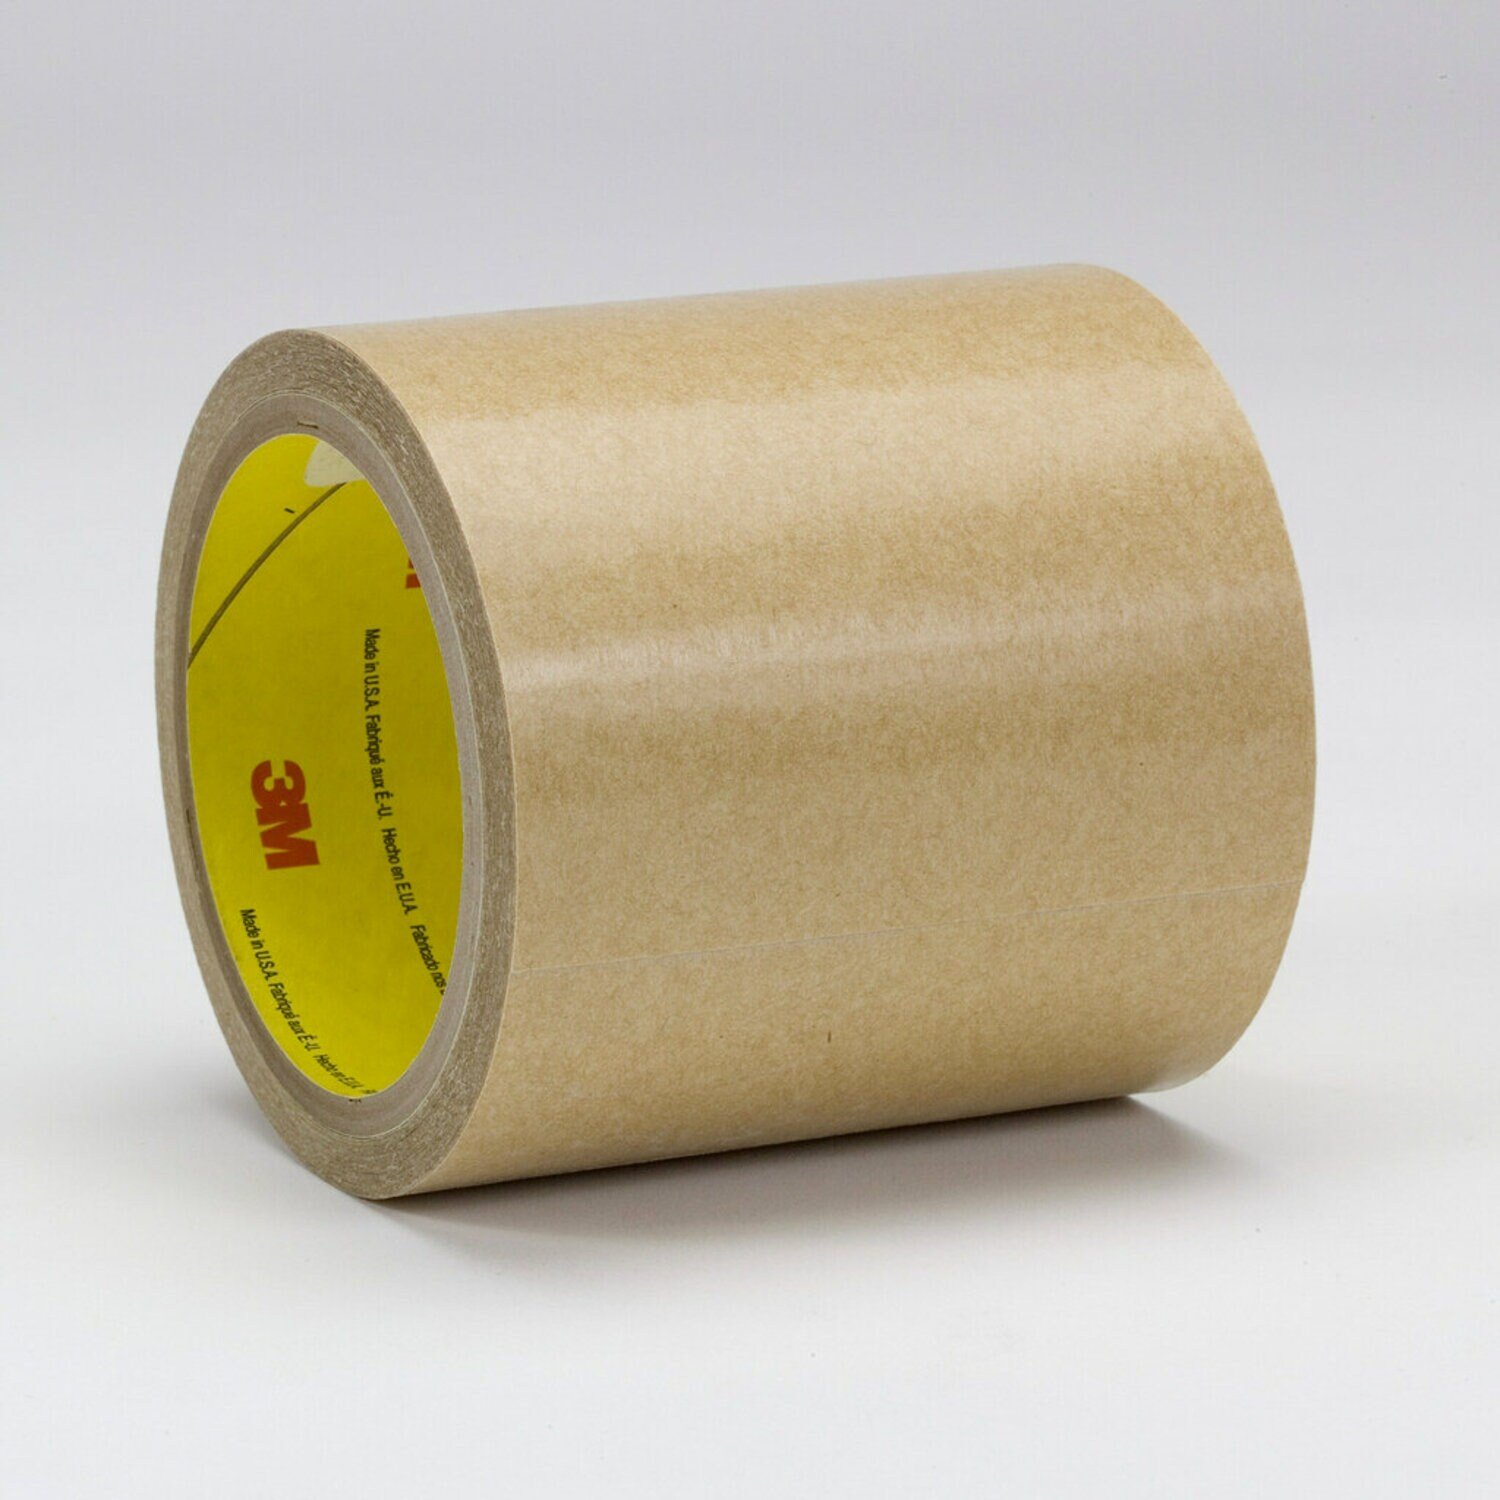 7100003000 - 3M Adhesive Transfer Tape 927, Clear, 12 in x 60 yd, 2 mil, 4 rolls per
case